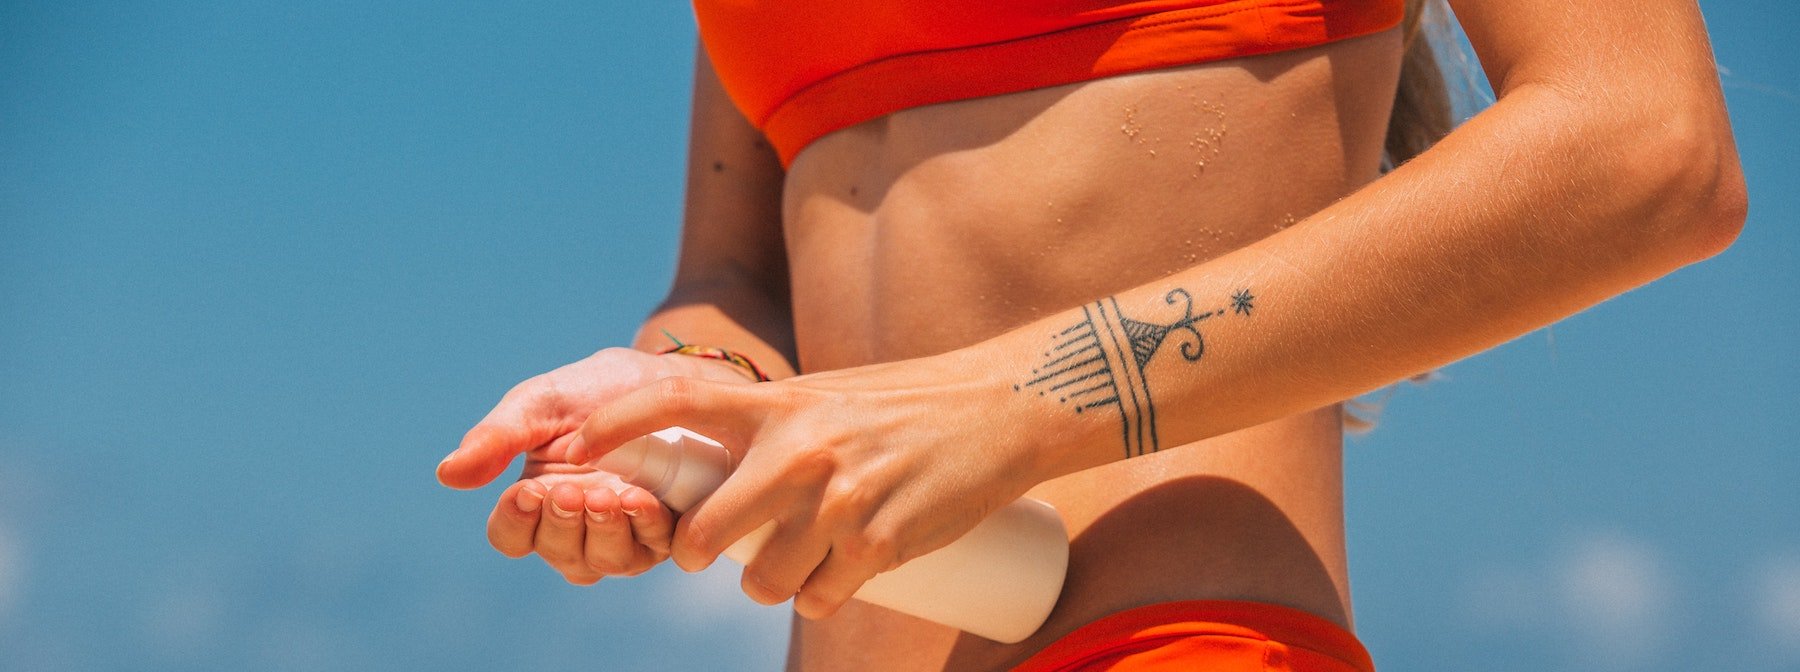 How to Treat Those Uncomfortable Areas That Get Sunburned